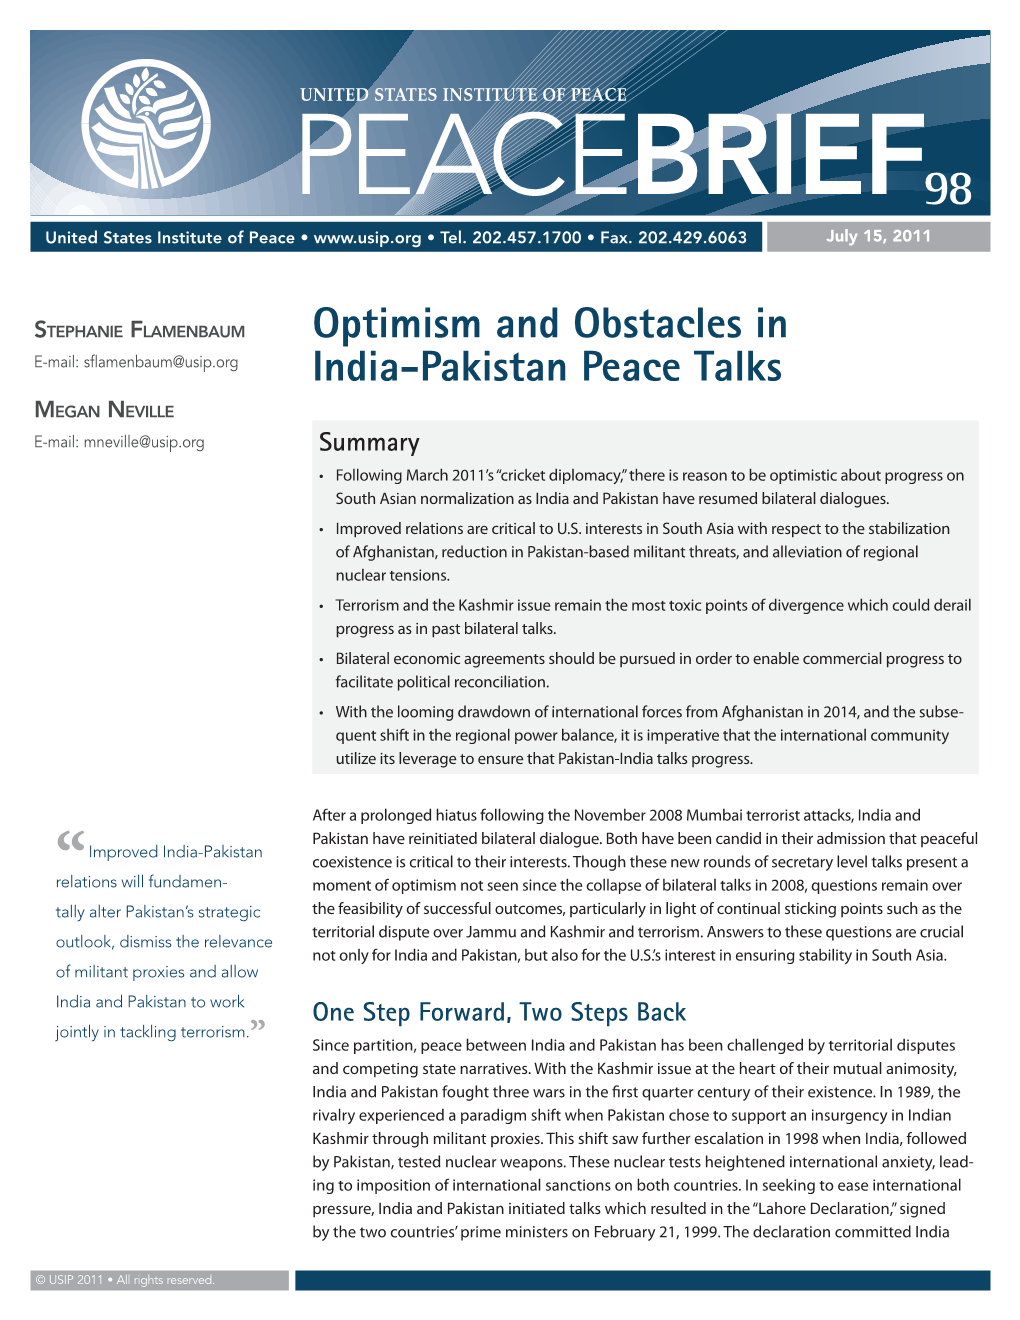 Optimism and Obstacles in India-Pakistan Peace Talks